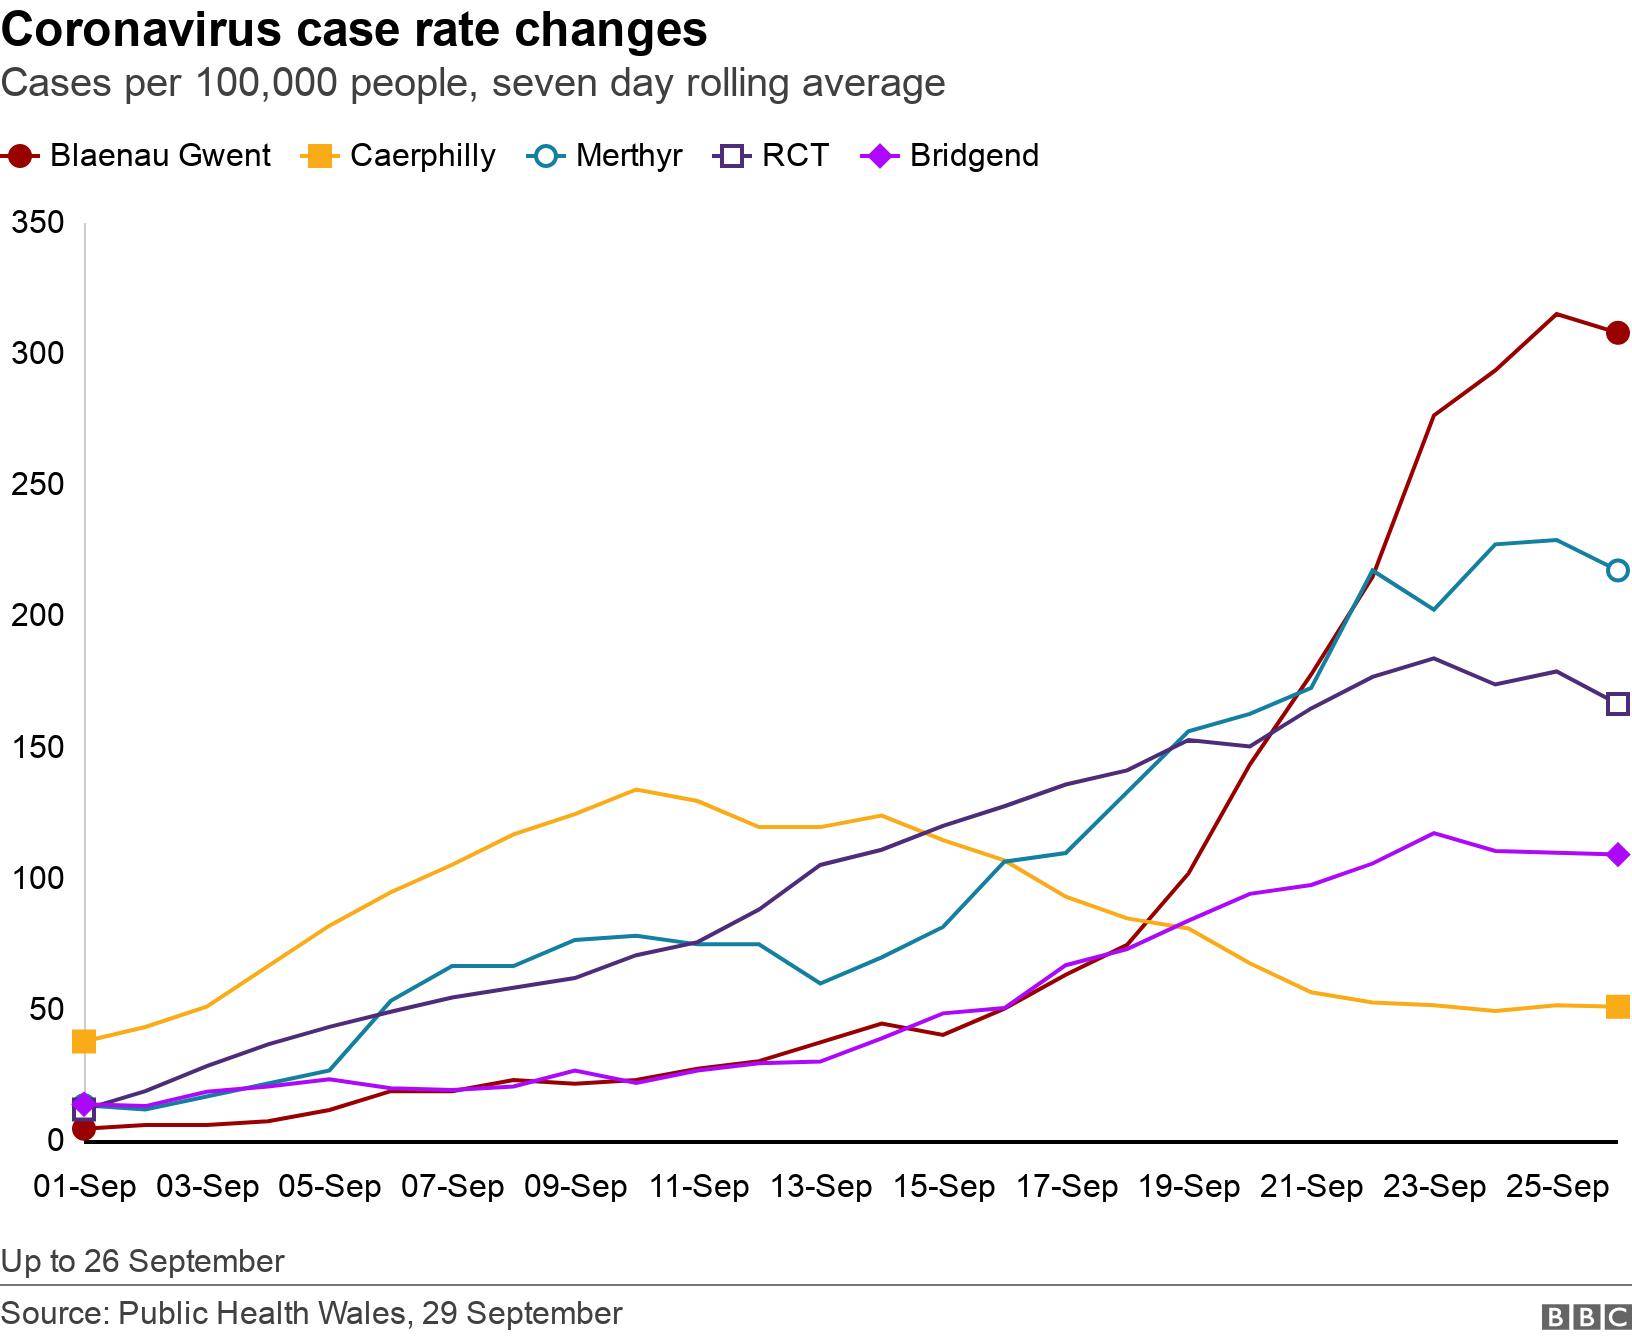 Coronavirus case rate changes. Cases per 100,000 people, seven day rolling average. Up to 26 September.